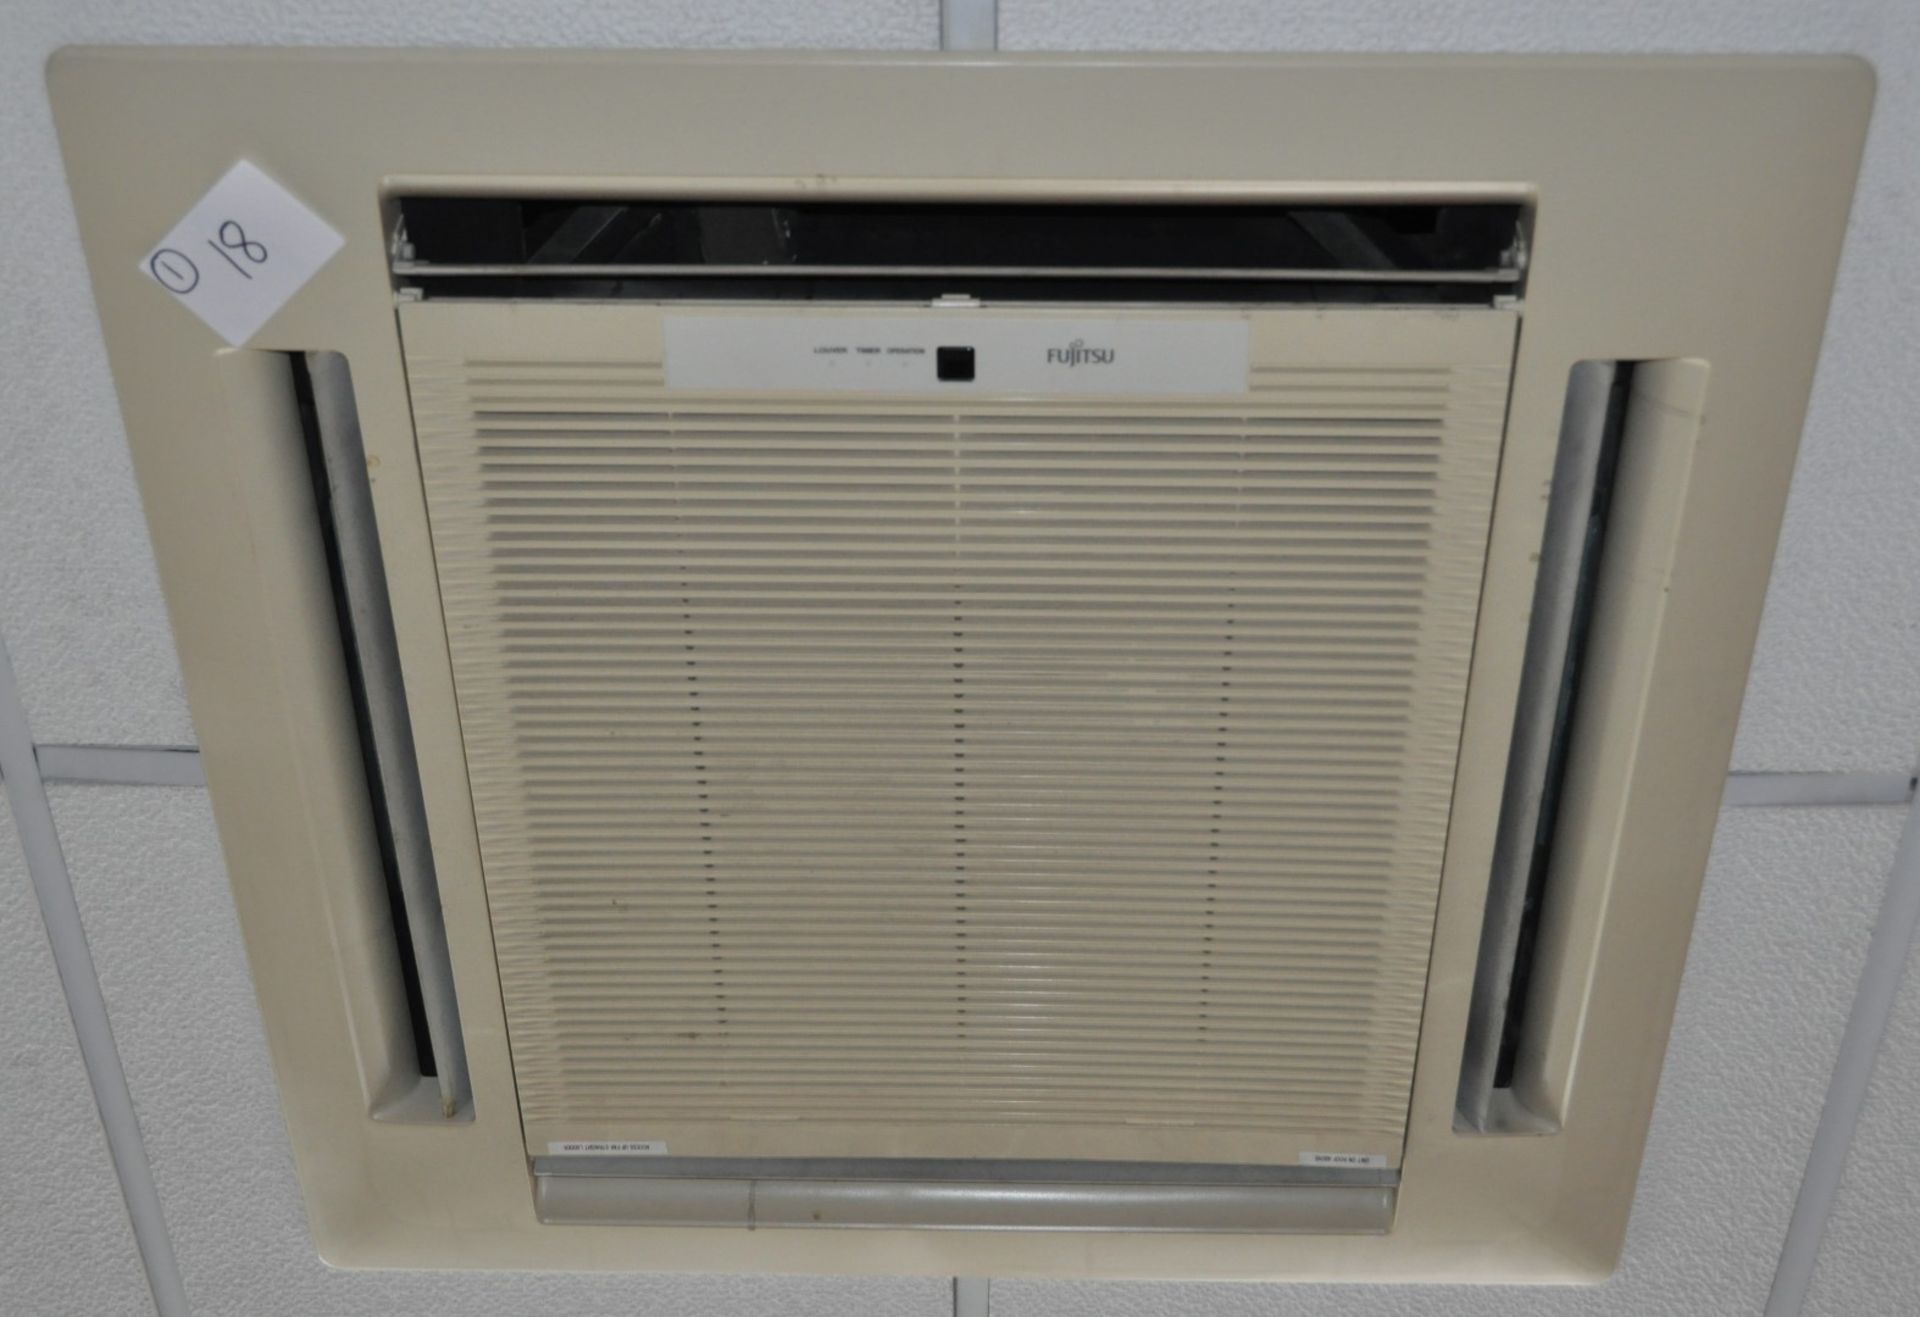 1 x Fujitsu Air Conditioning Indoor Unit - Model AUY25AWA3 - Includes Wall Mounted Control Panel - - Image 2 of 9